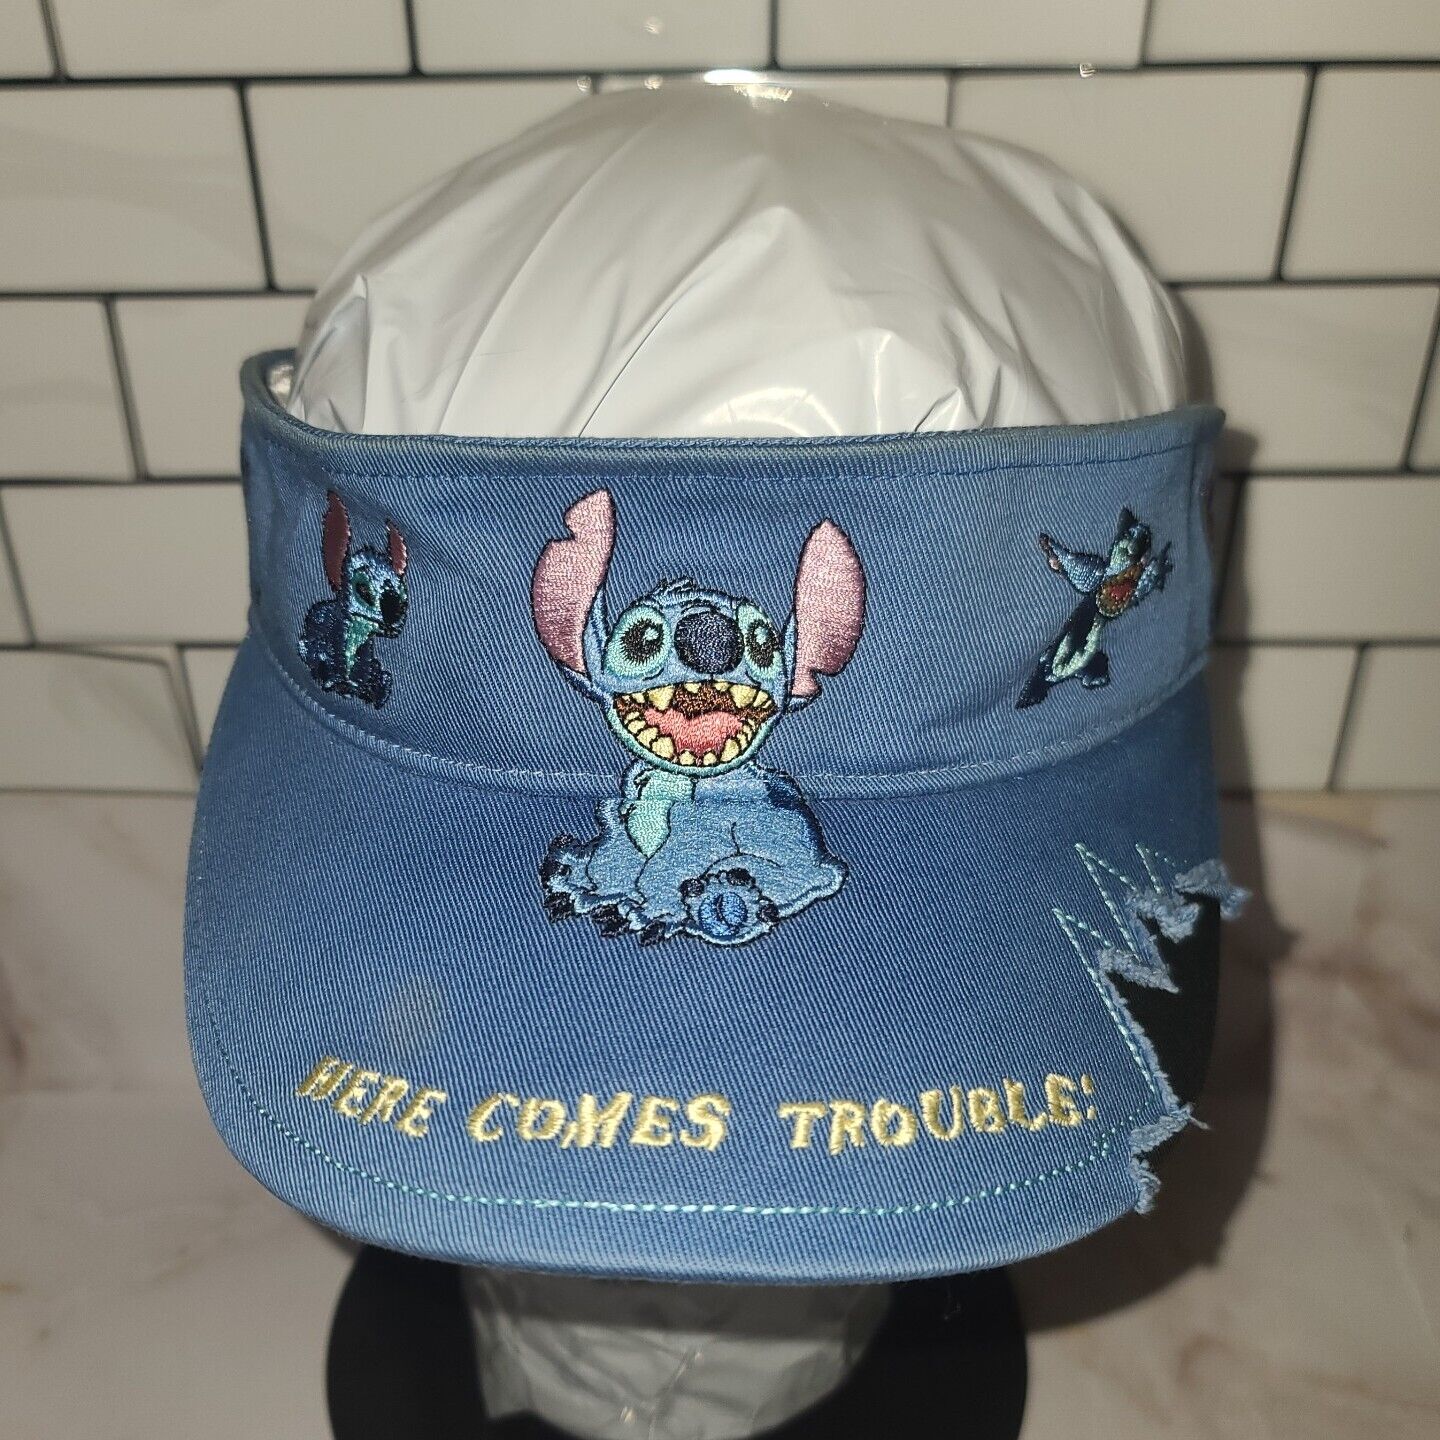 VTG Disney Parks Lilo & Stitch Here Comes Trouble Blue Visor Embroidered Youth